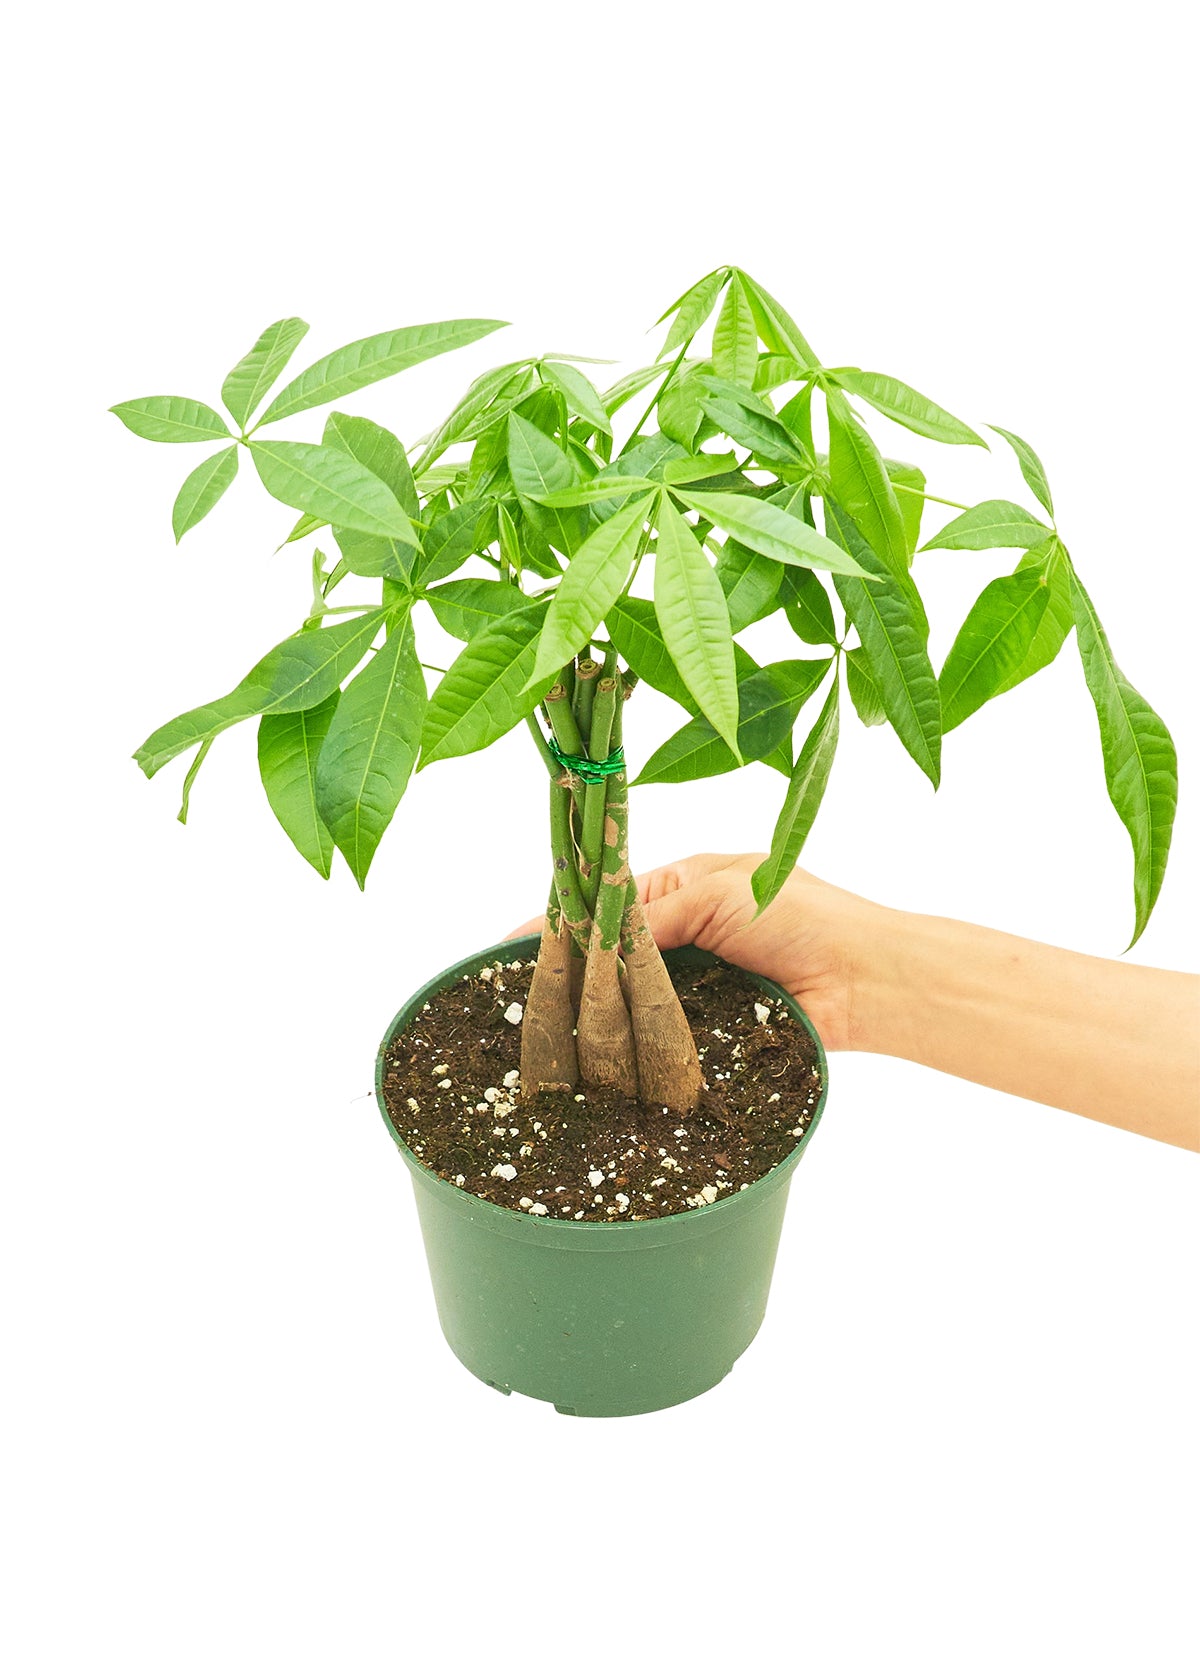 Medium size Braided Money Tree plant in a growers pot with a white background and a hand holding the pot showing the top view